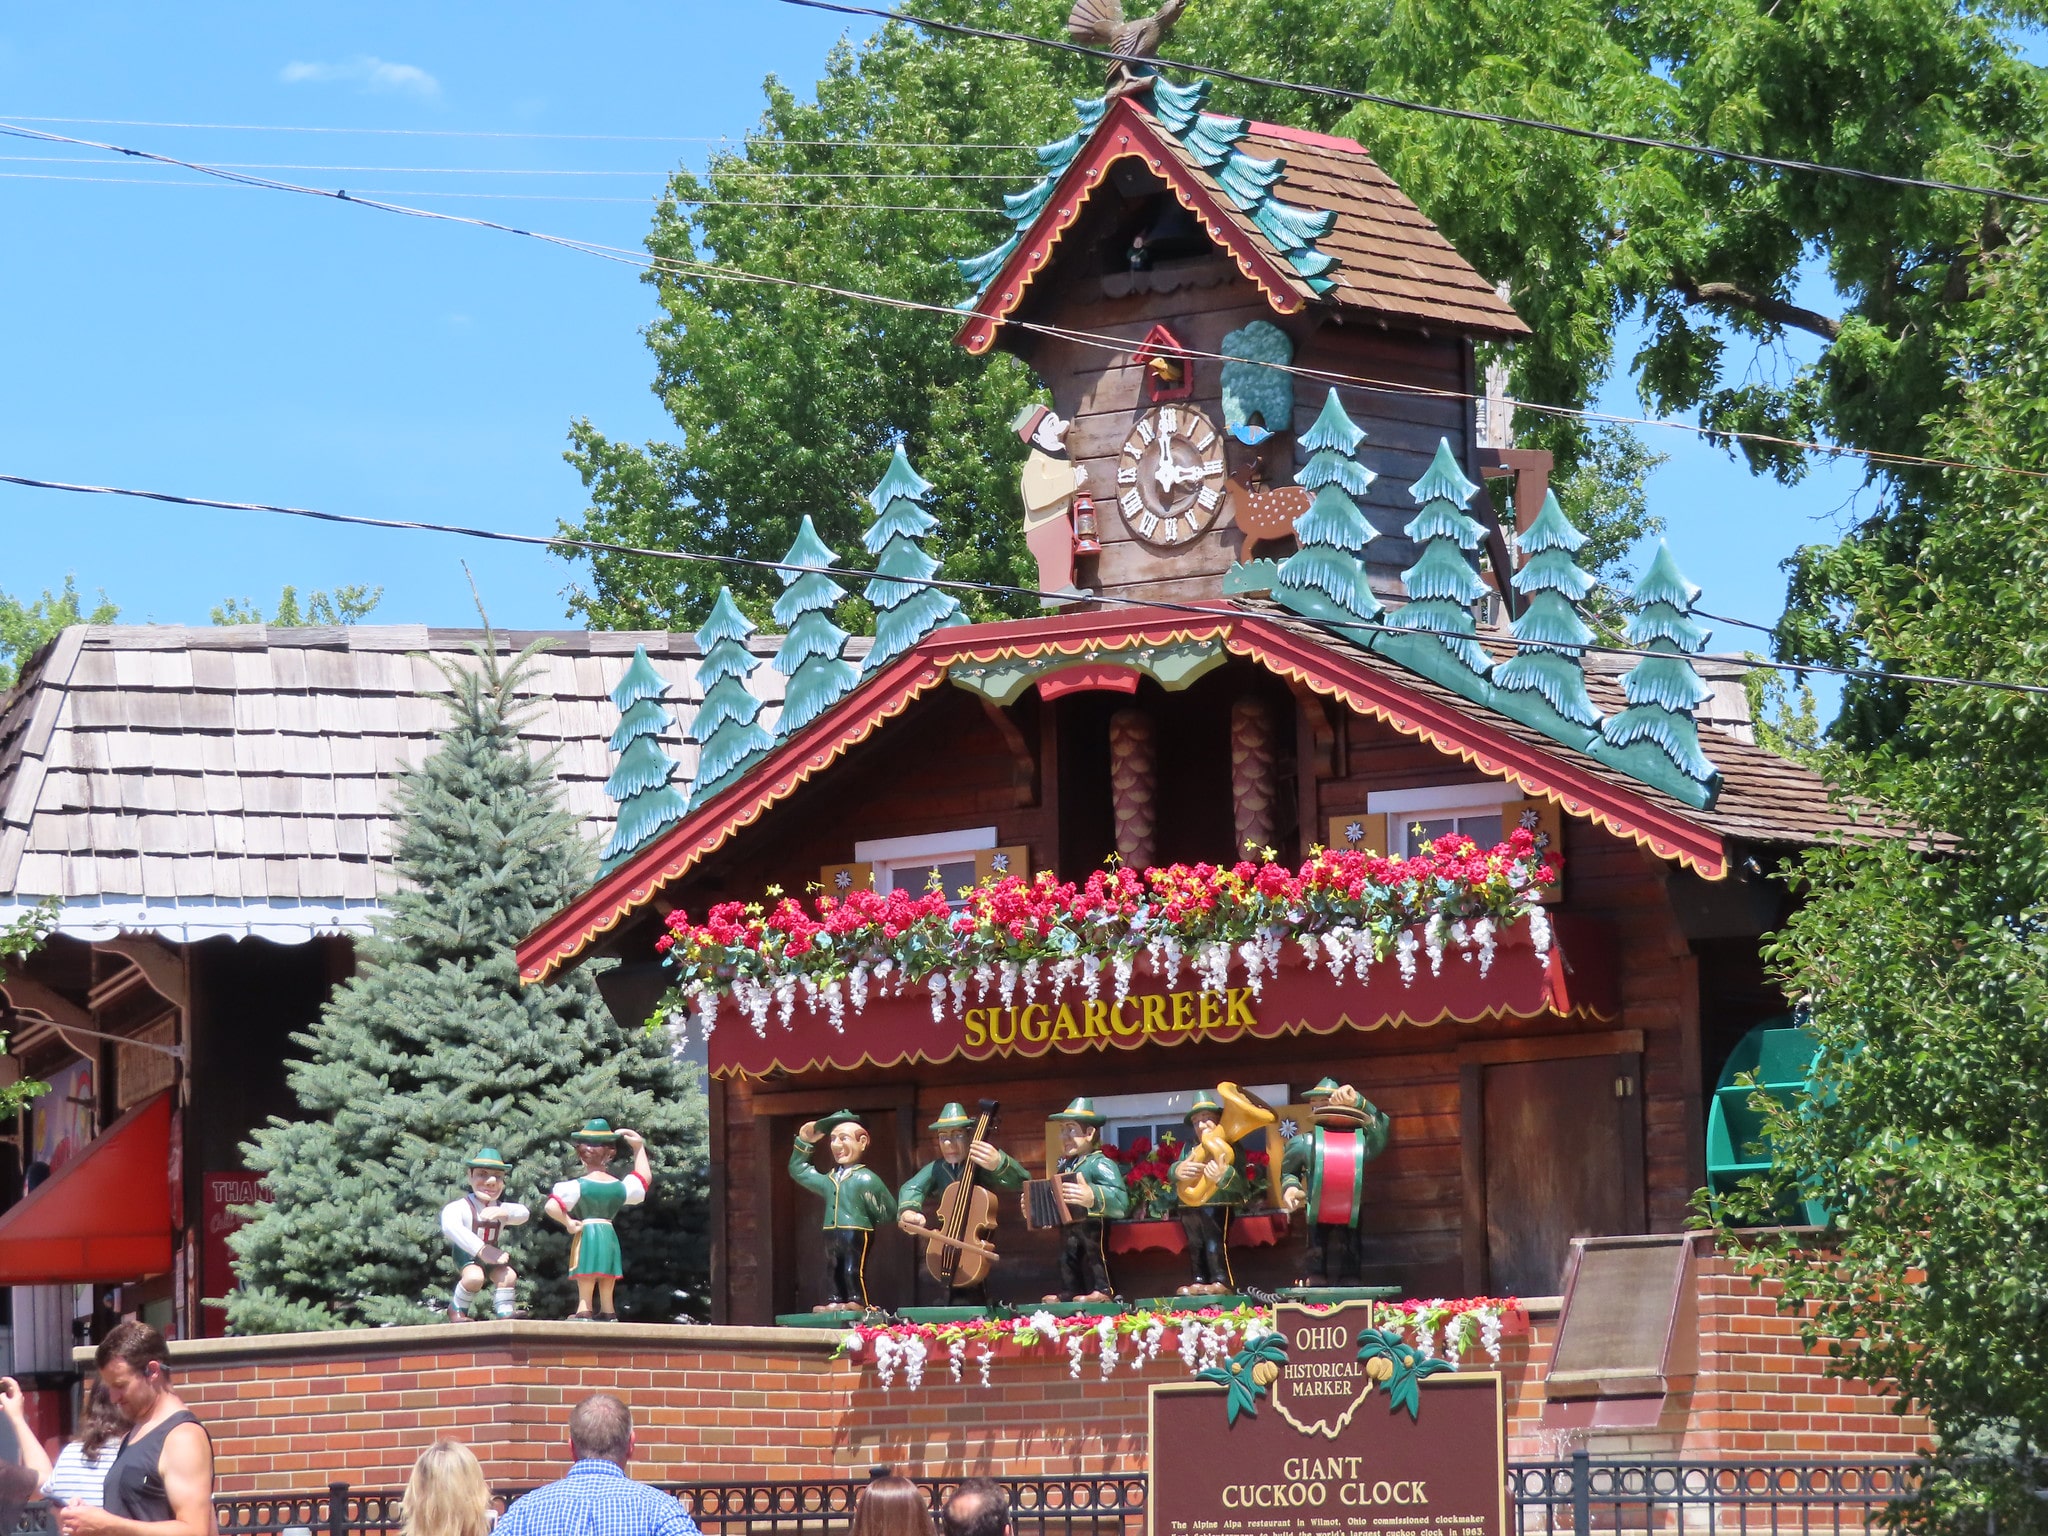 horizontal photo of the world's largest cuckoo clock in sugarcreek ohio with the band and the characters